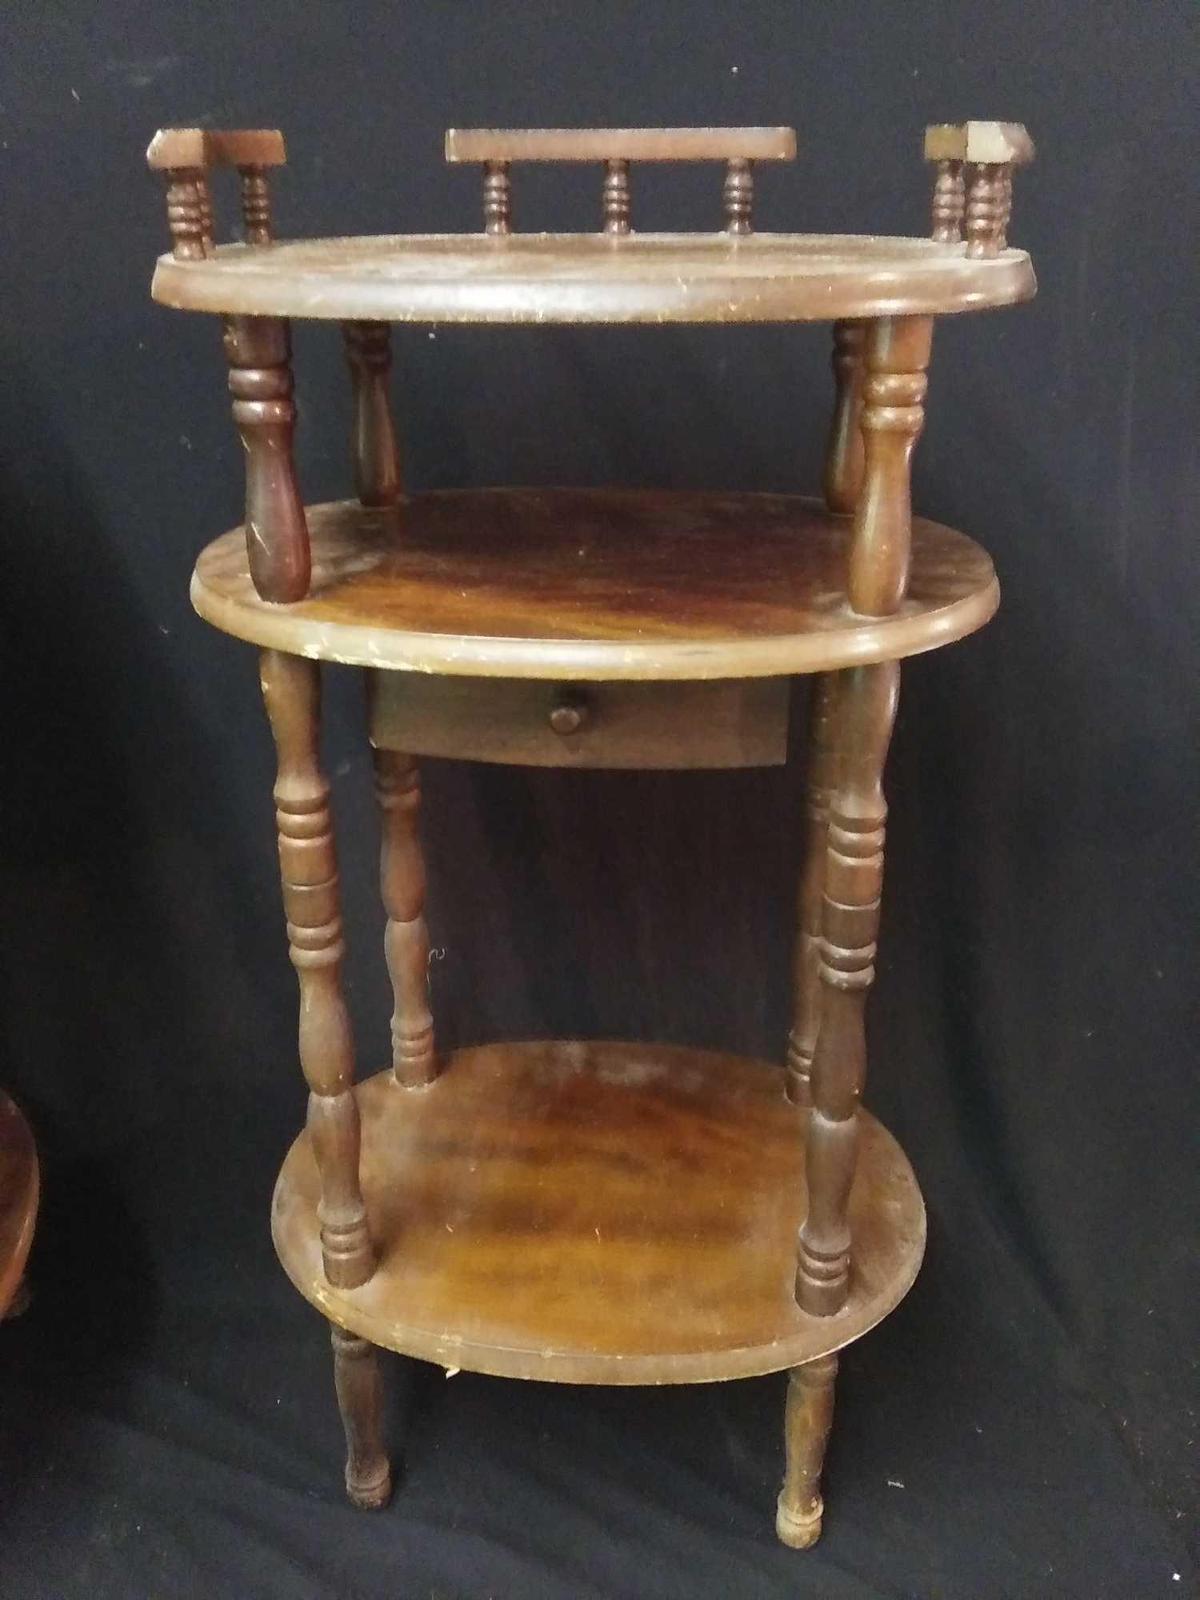 Unique 3 Level Spindle Leg Display / Side Table